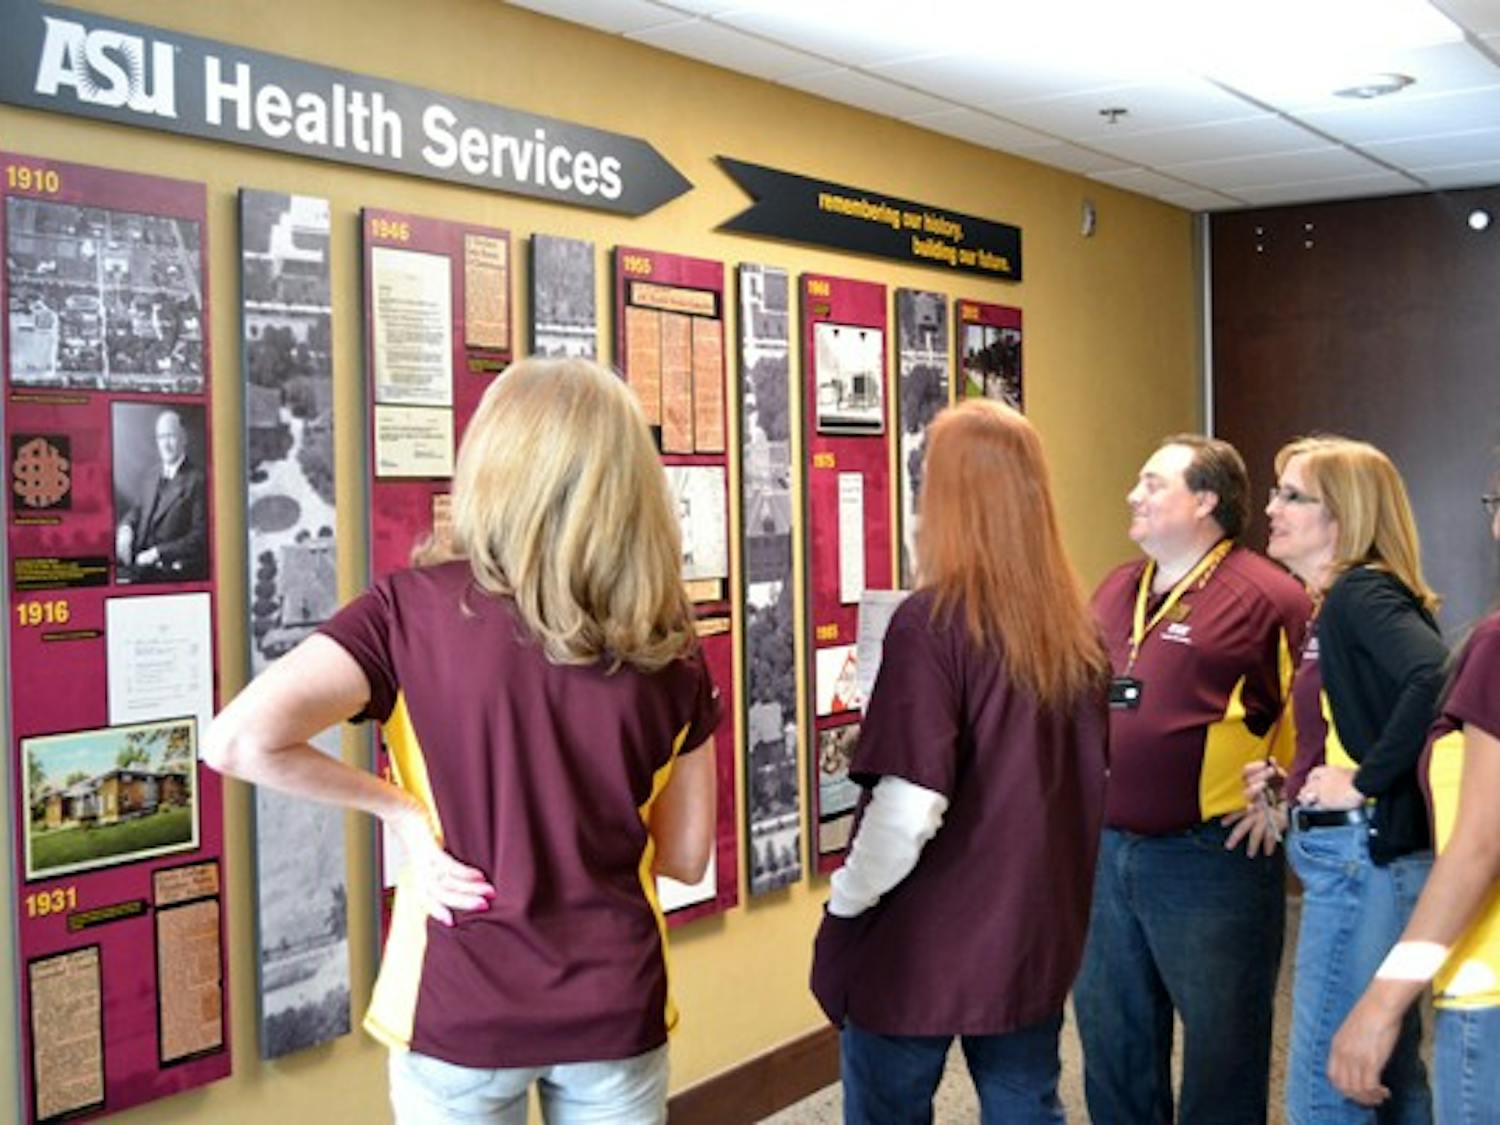 The new Health Services Building on the Tempe campus held an open house Tueday morning to educate students about the resources they provide, including flu shots and examinations. (Photo by Mackenzie McCreary)